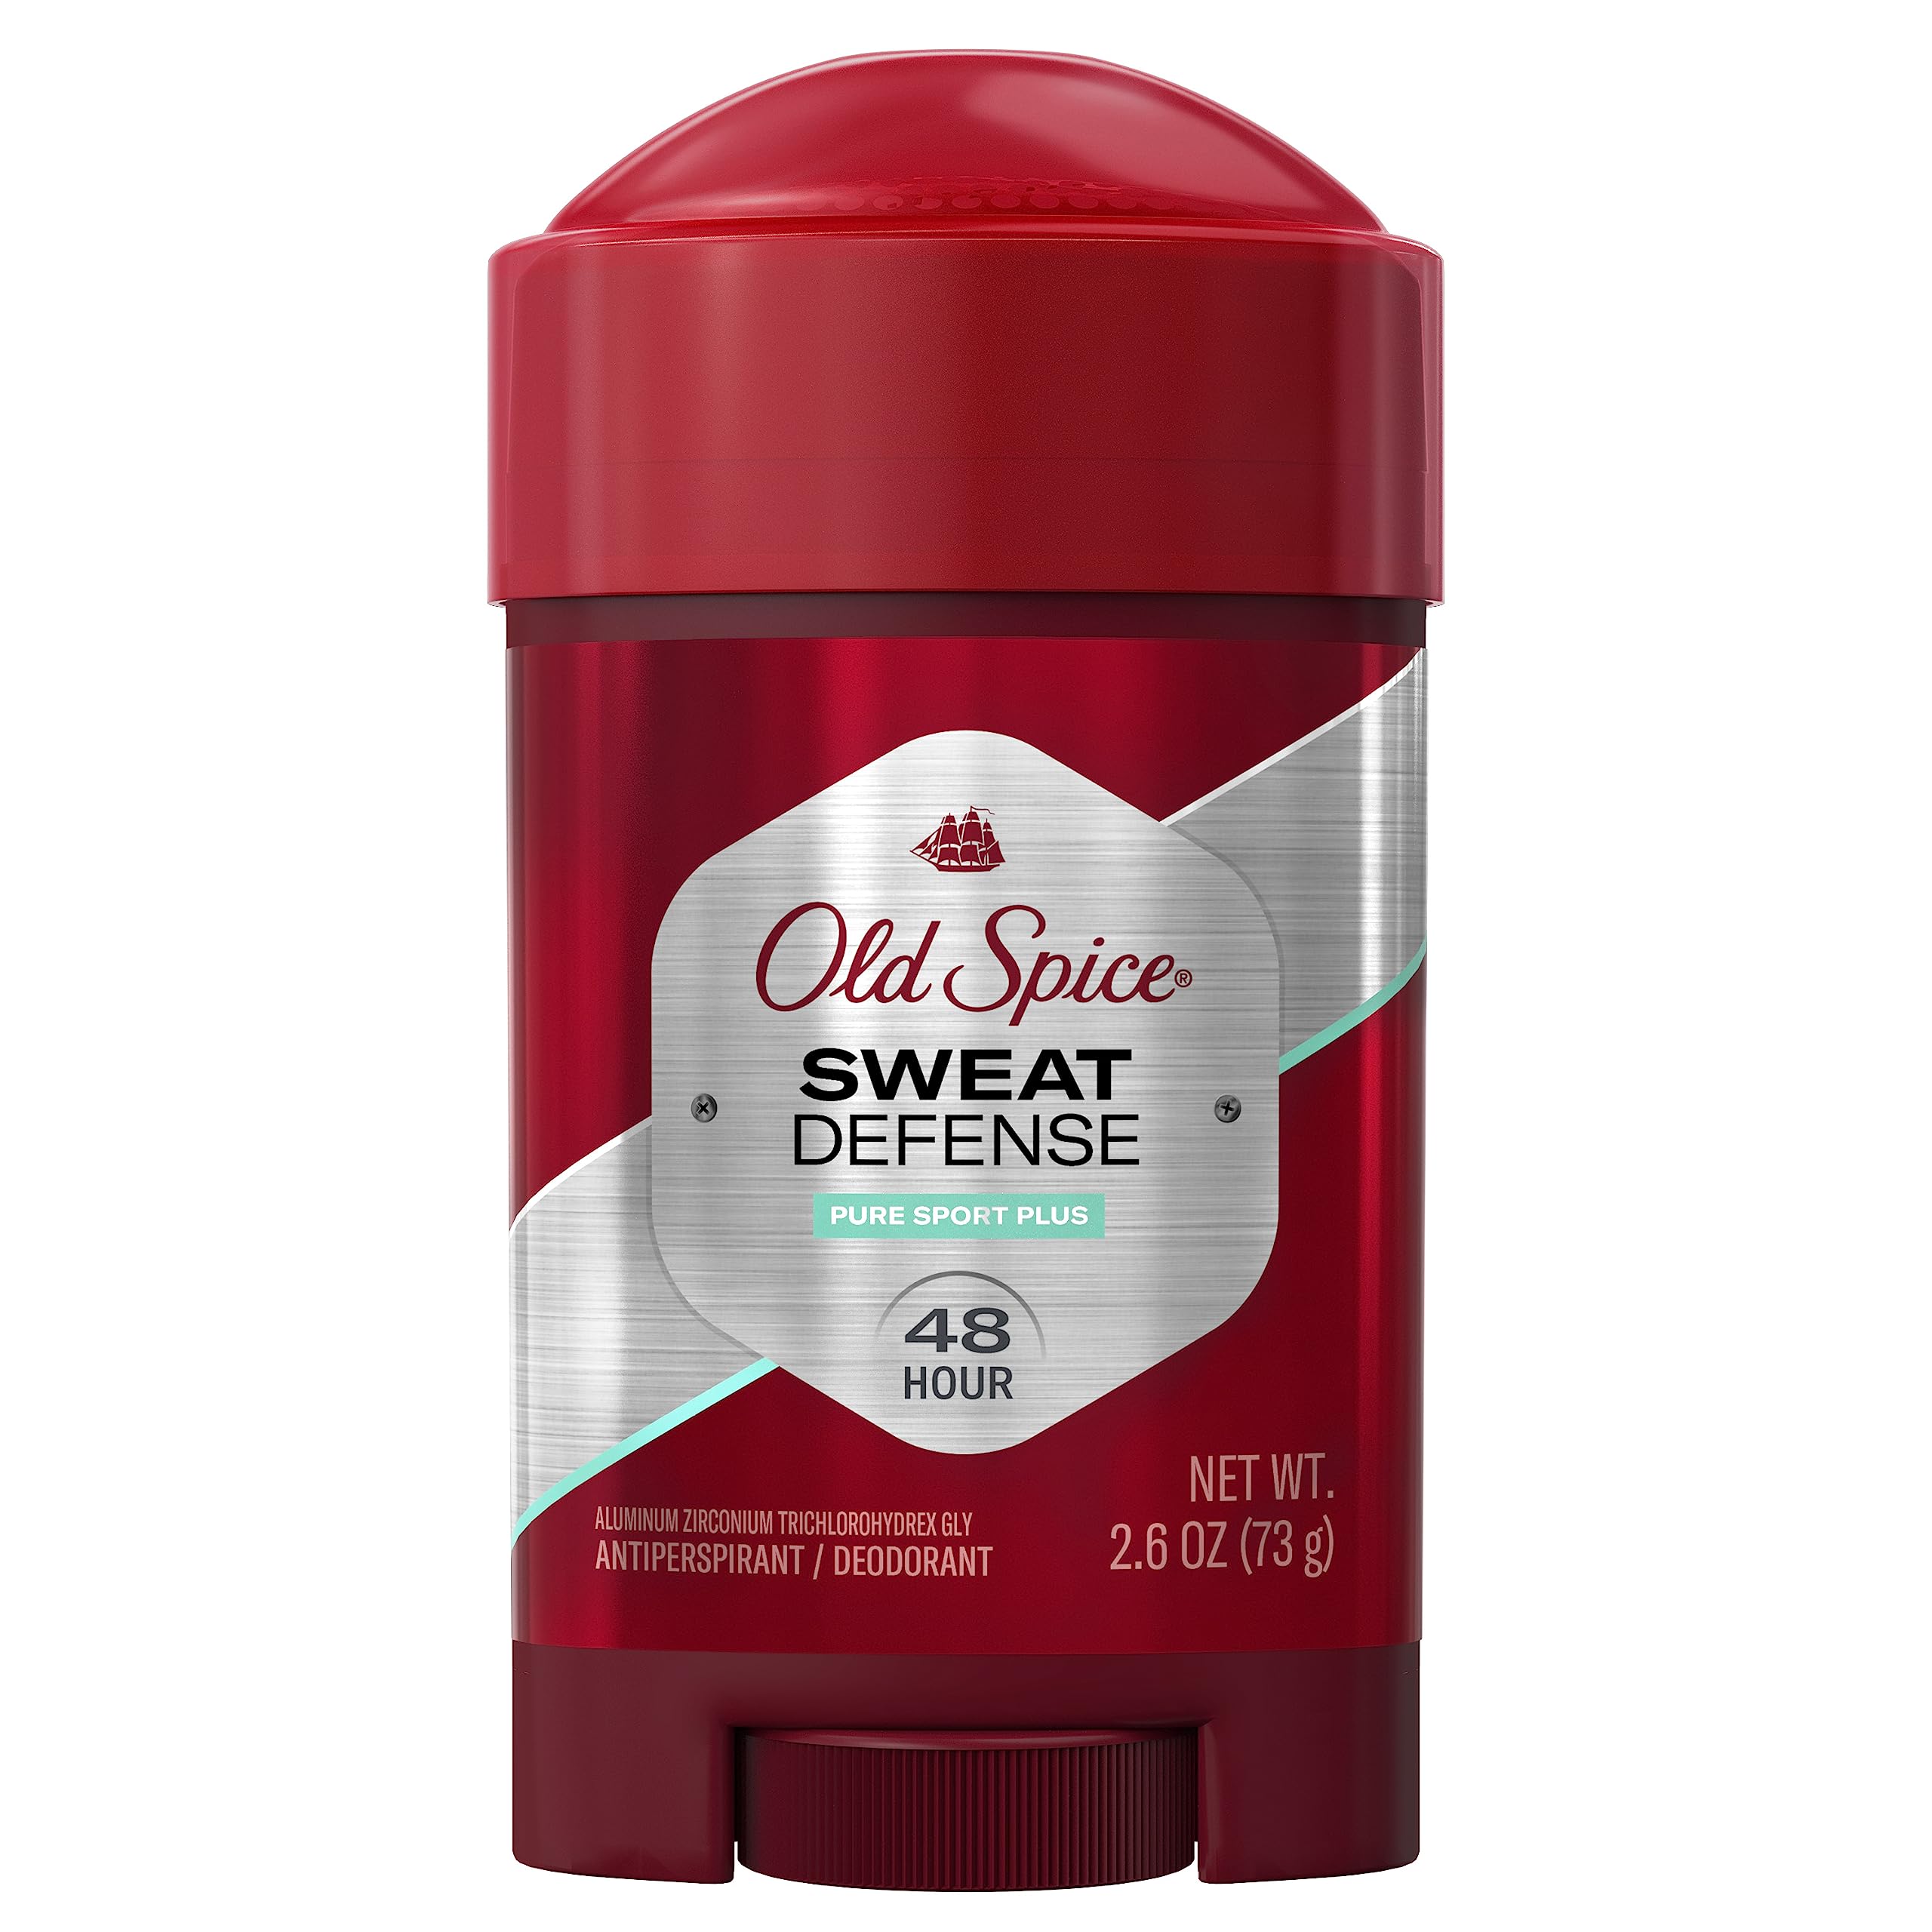 Old Spice Sweat Defense Antiperspirant and Deodorant Soft Solid for Men, Pure Sport Plus, 2.6 oz